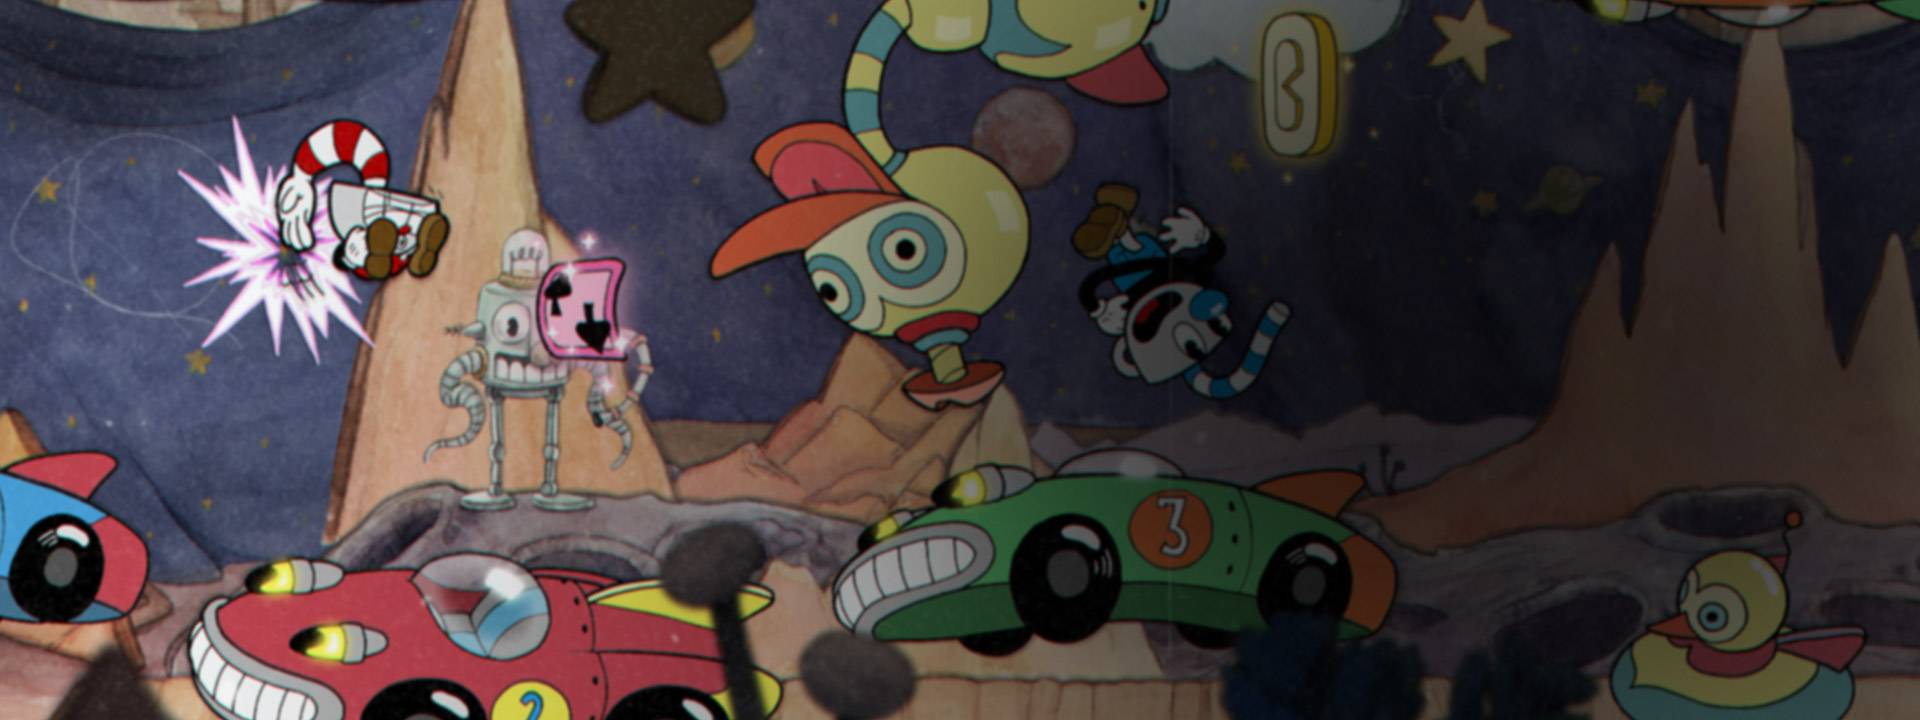 Cuphead and Mugman dodge toy cars and a mechanical duck